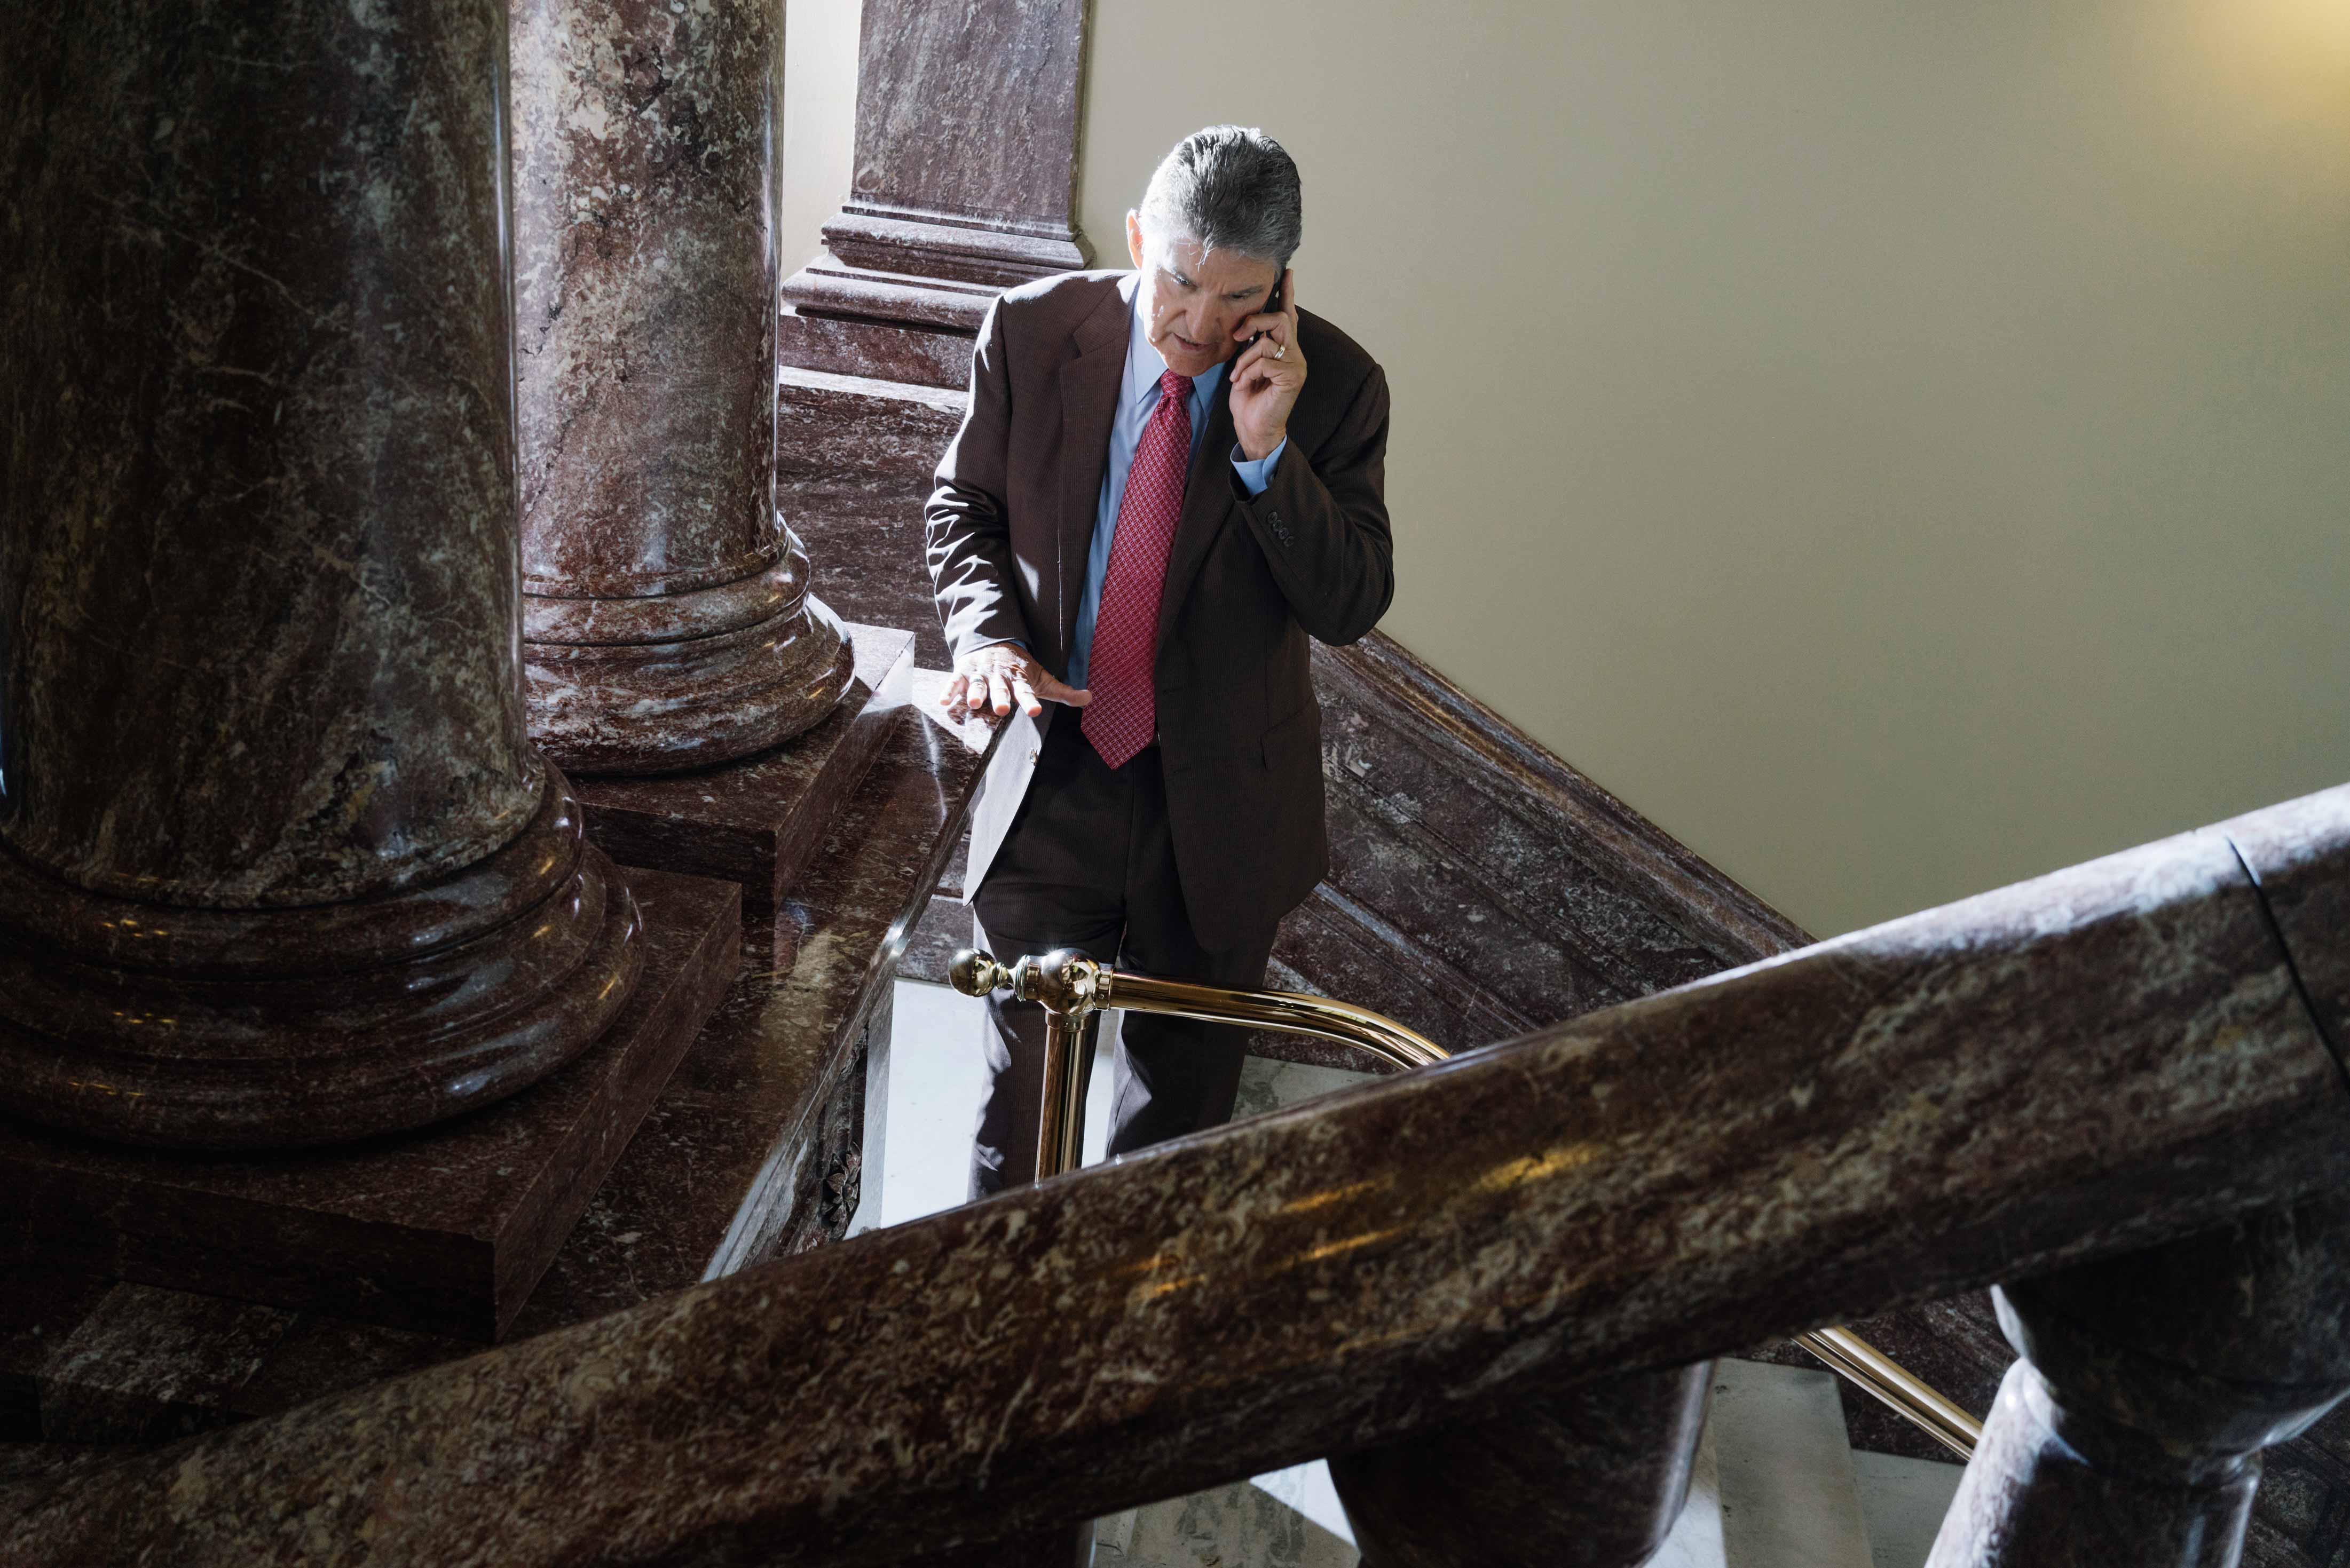 <strong>Up and down</strong> <em>Frustrated by gridlock and a lack of comity in Congress, Manchin says he just “wants the place to work” </em> (Thomas Prior for TIME)